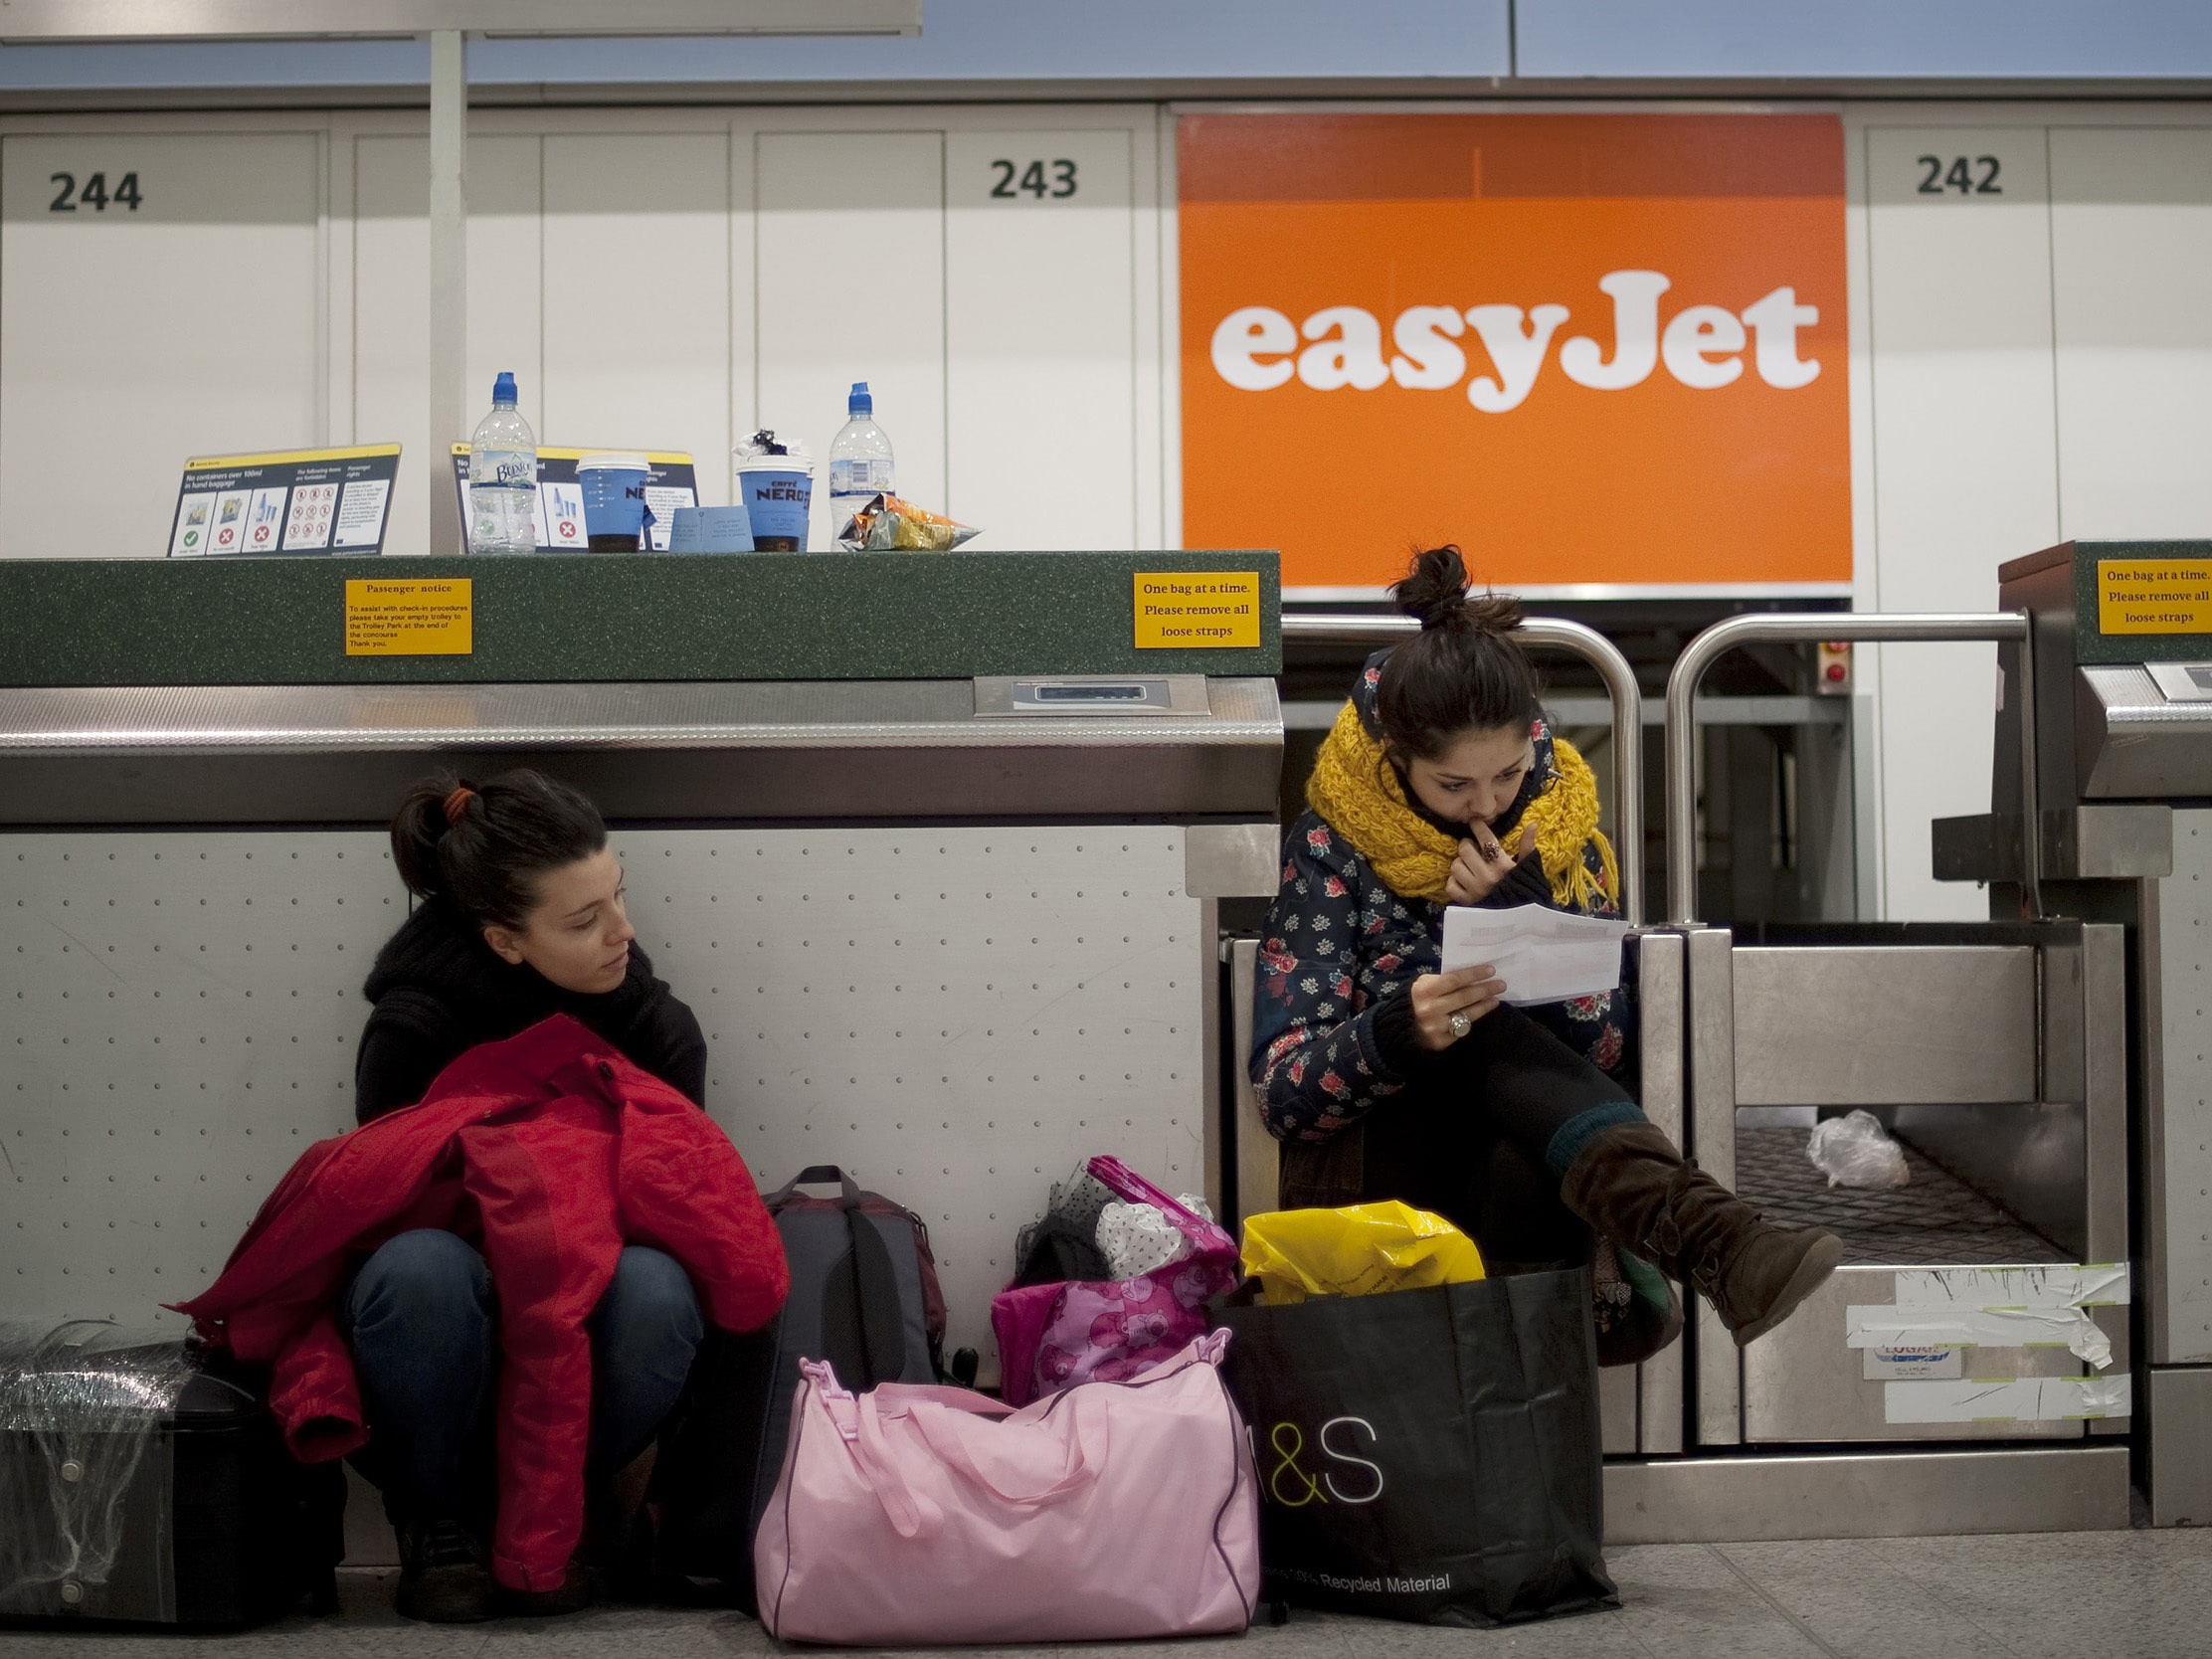 People waiting at an easyJet airport counter